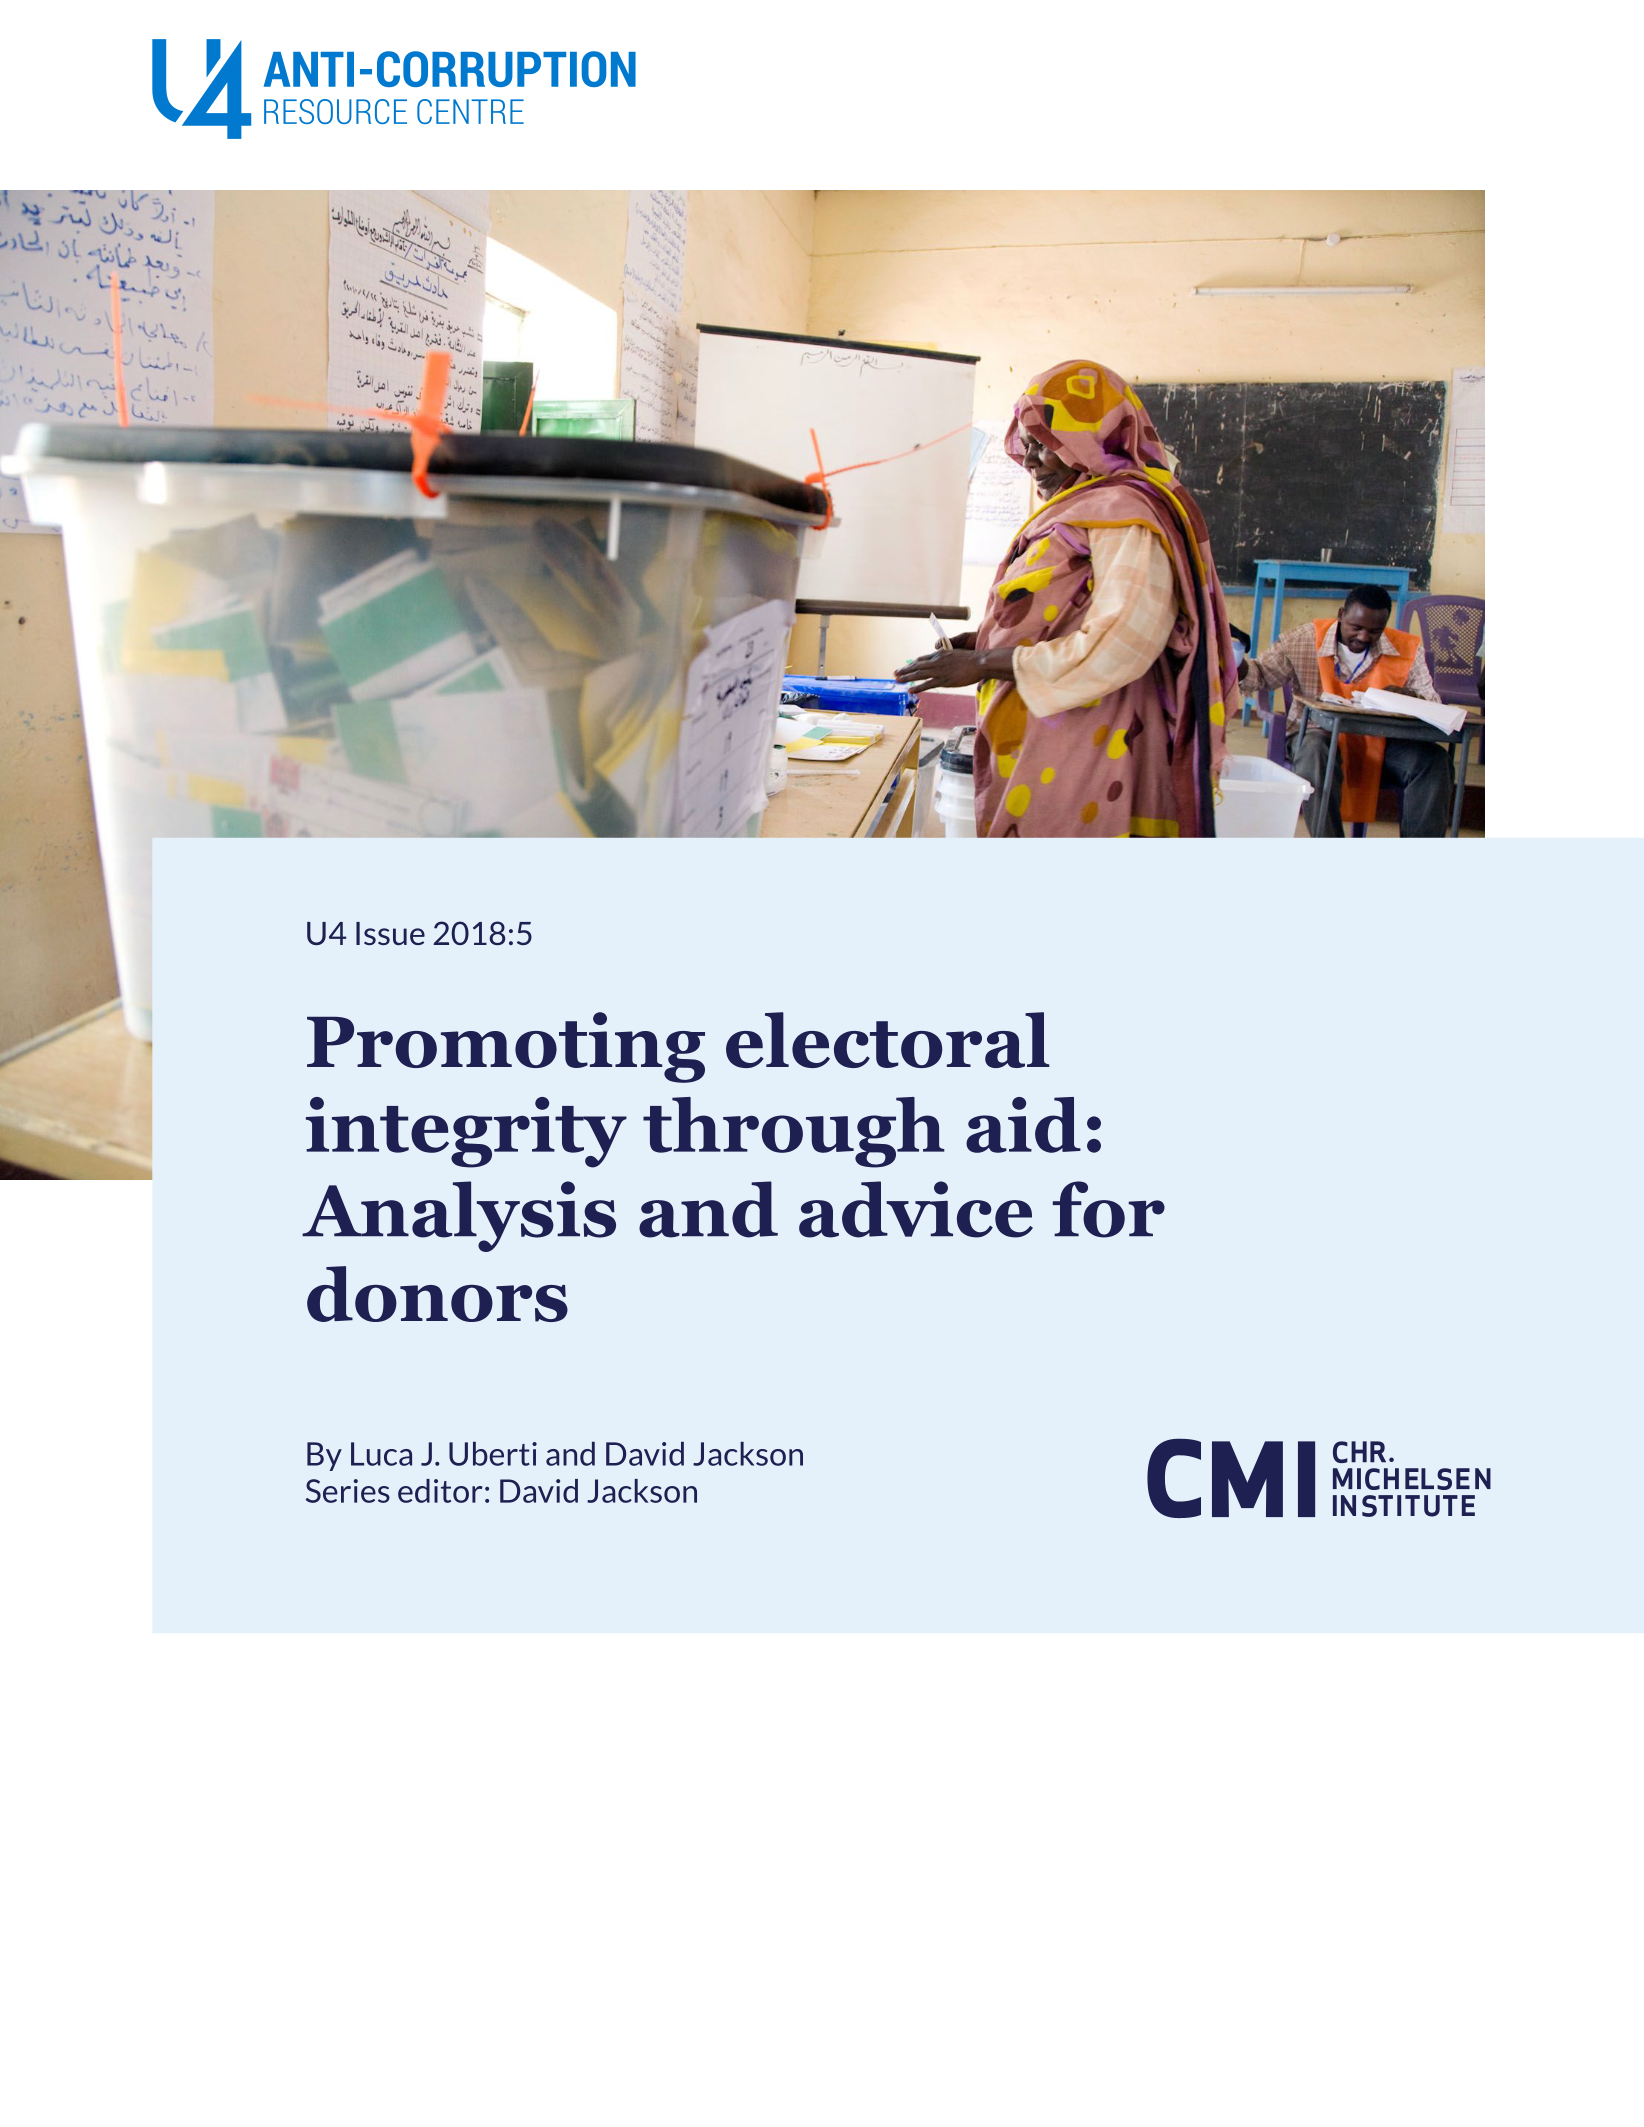 Promoting electoral integrity through aid: Analysis and advice for donors